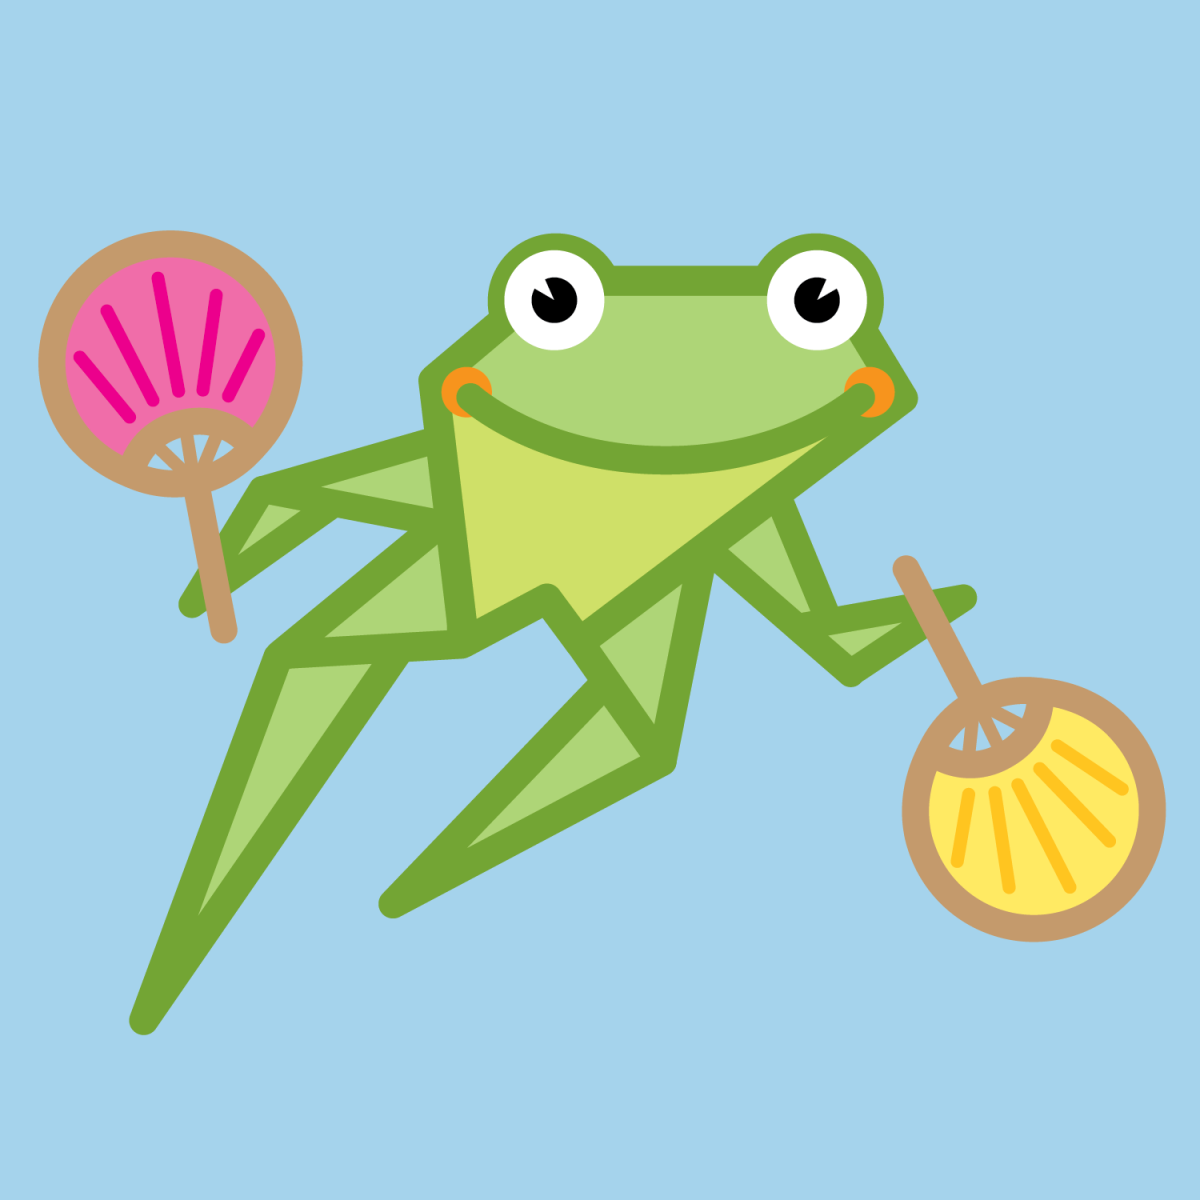 light blue square with green jumping frog in the center, frog is holding two fans. one fan in pink and one in yellow